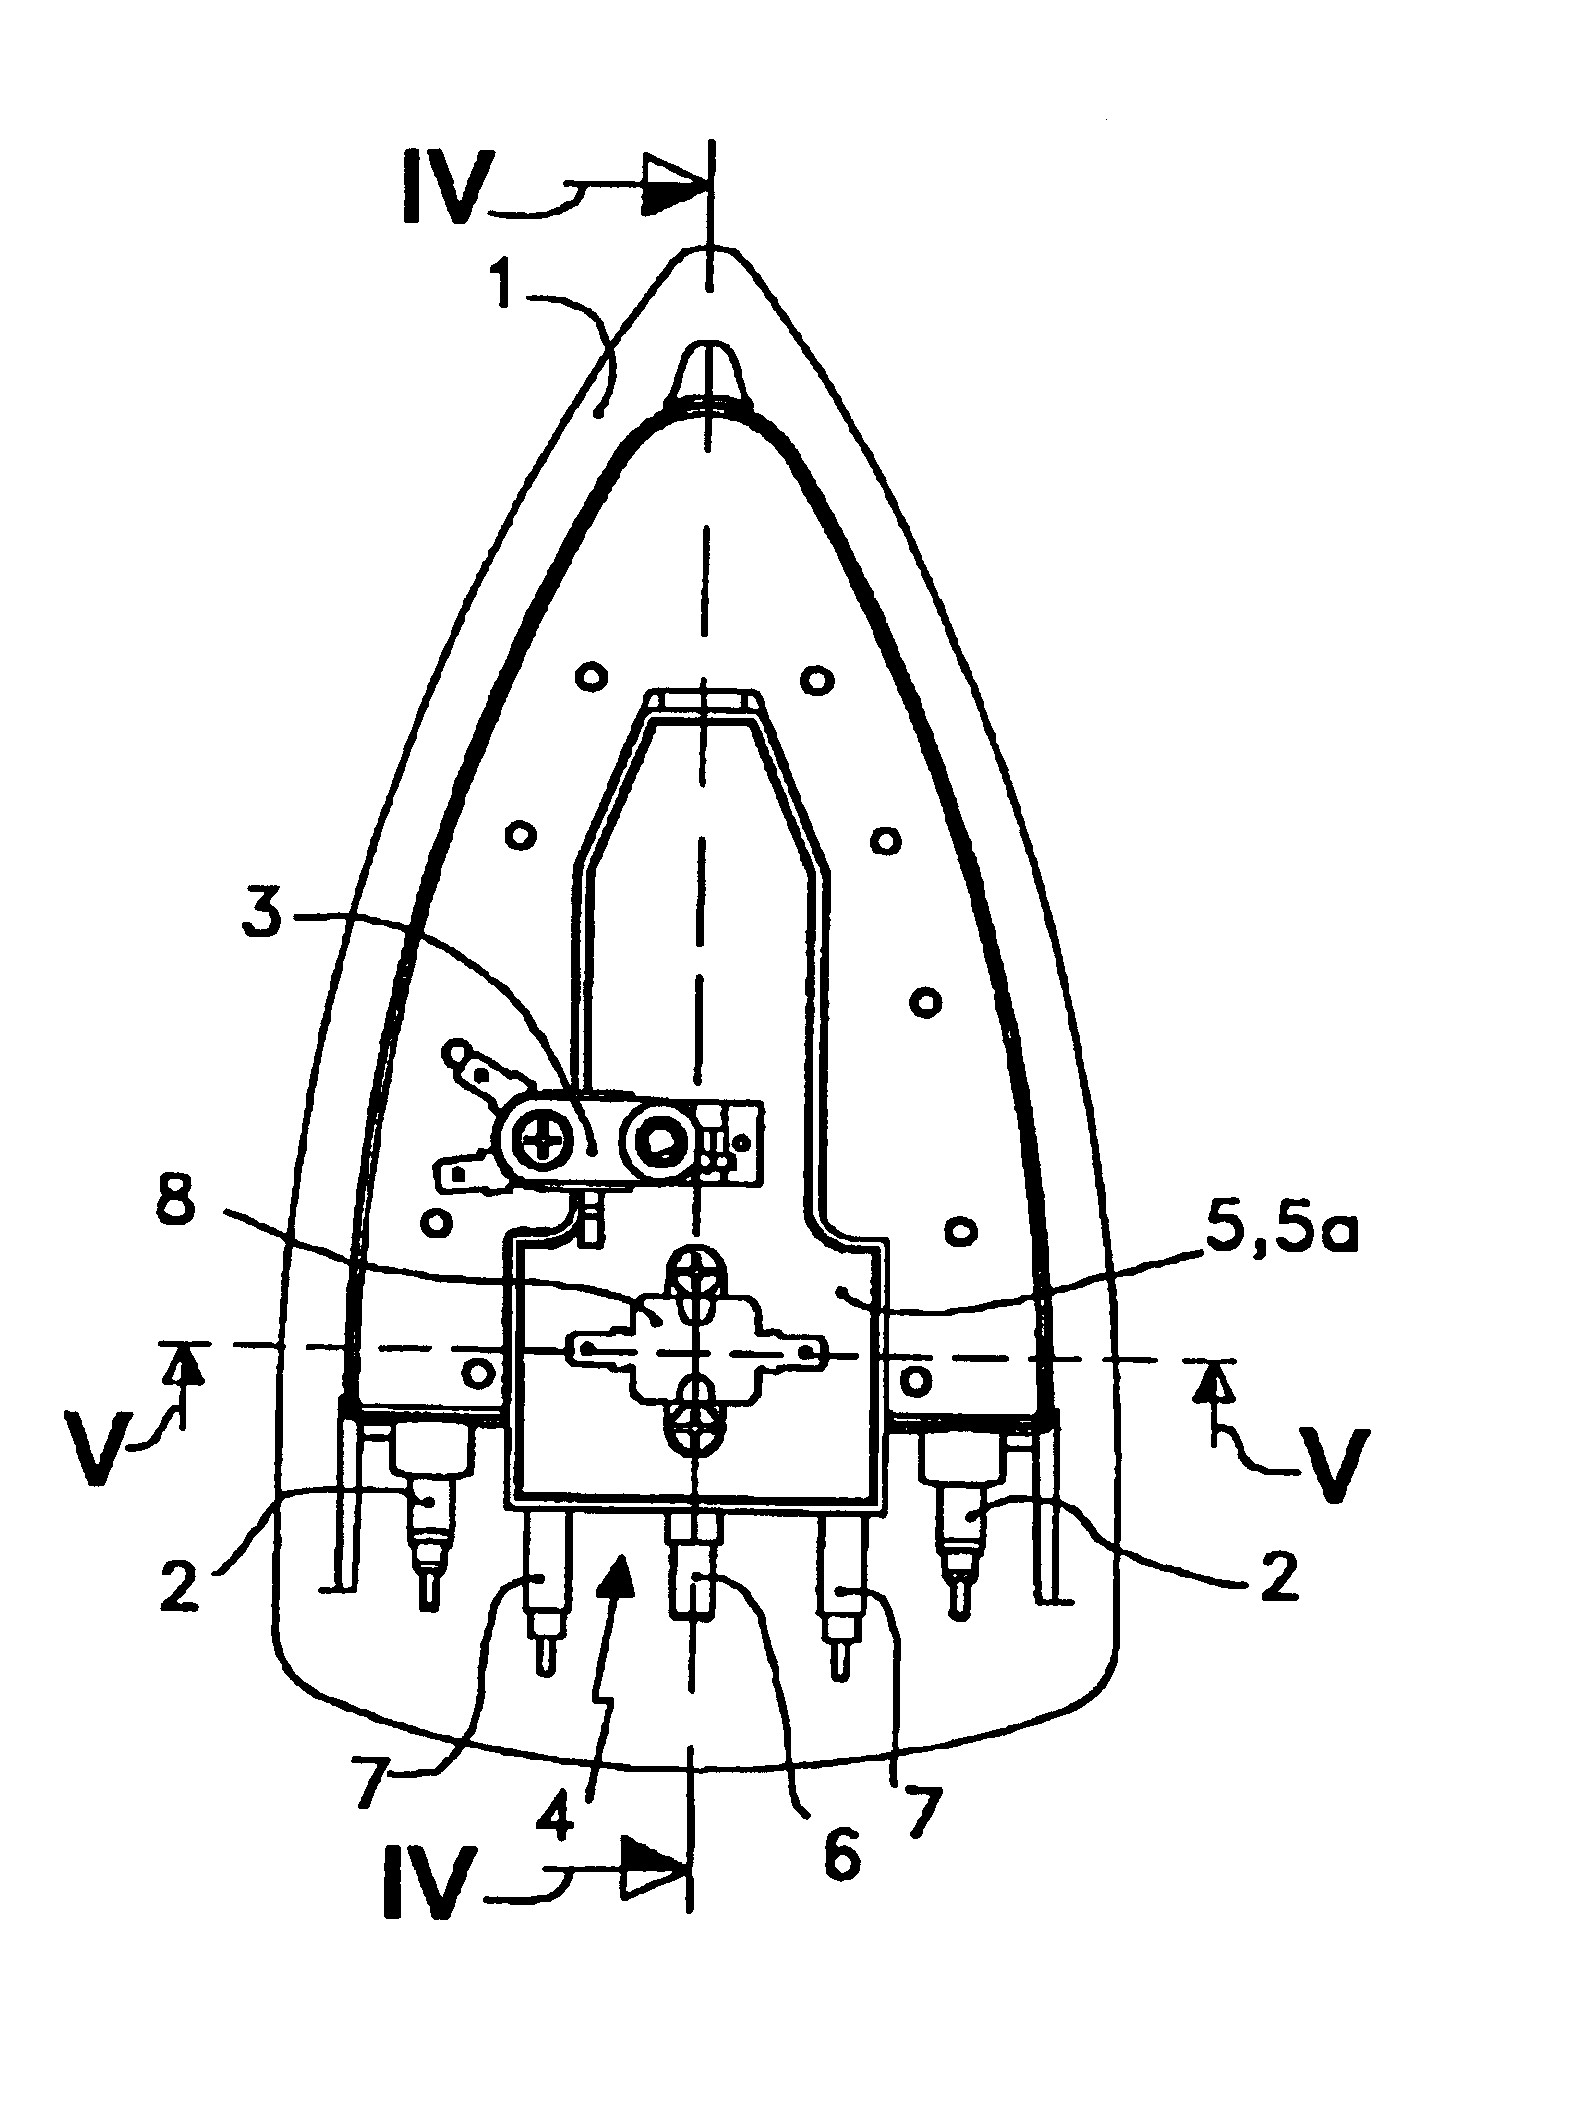 Domestic steam iron with autonomous steam assembly heated by separate heating element